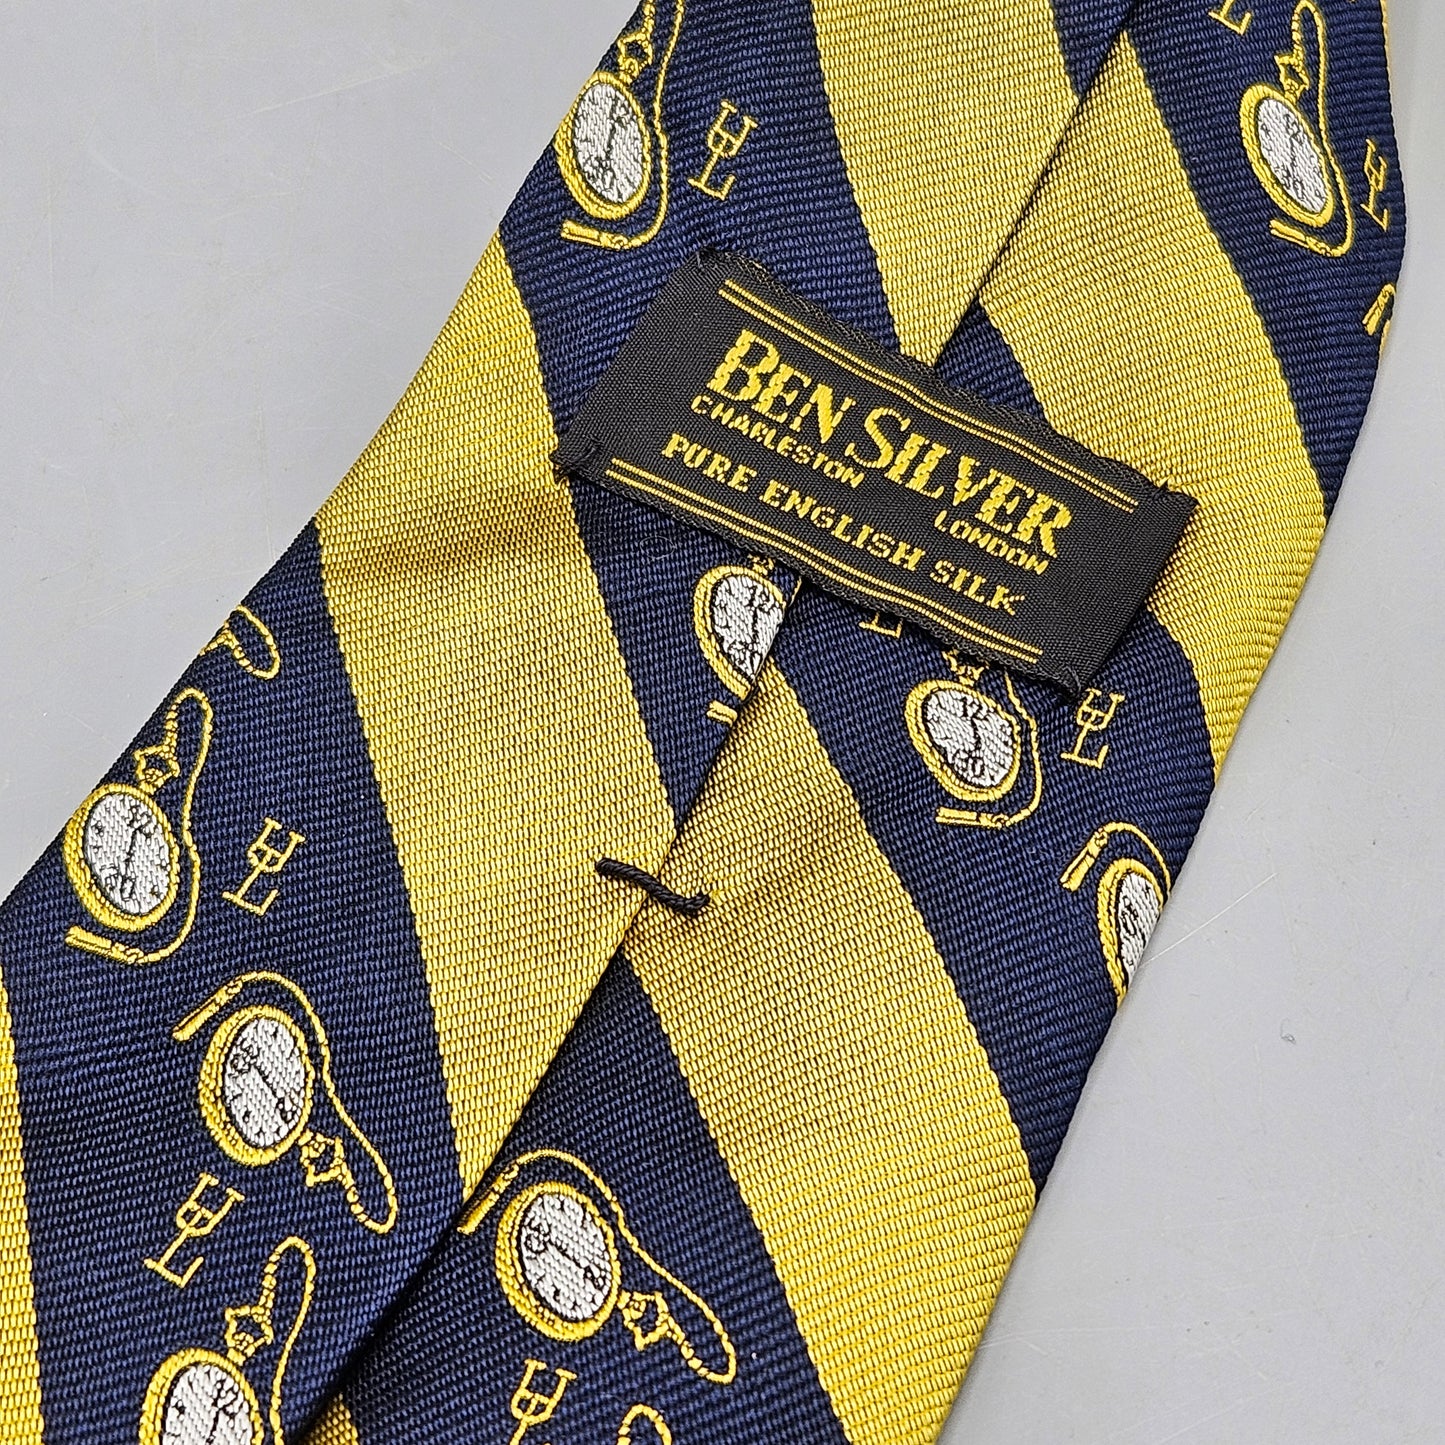 Vintage Navy Blue & Yellow Striped Union League Tie by Ben Silver